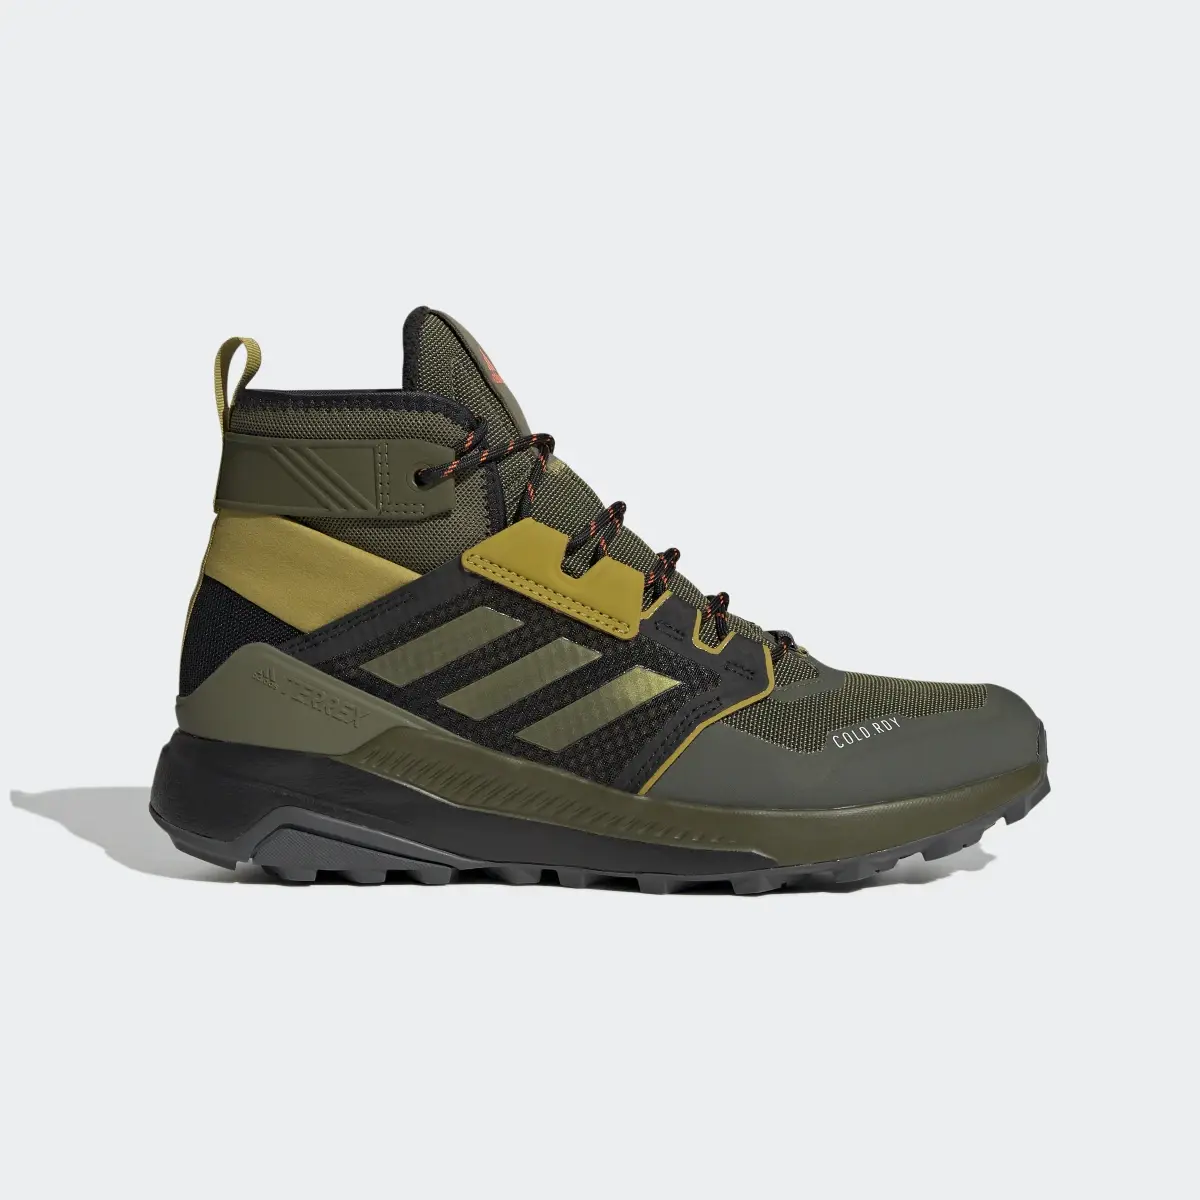 Adidas Terrex Trailmaker Mid COLD.RDY Hiking Boots. 2